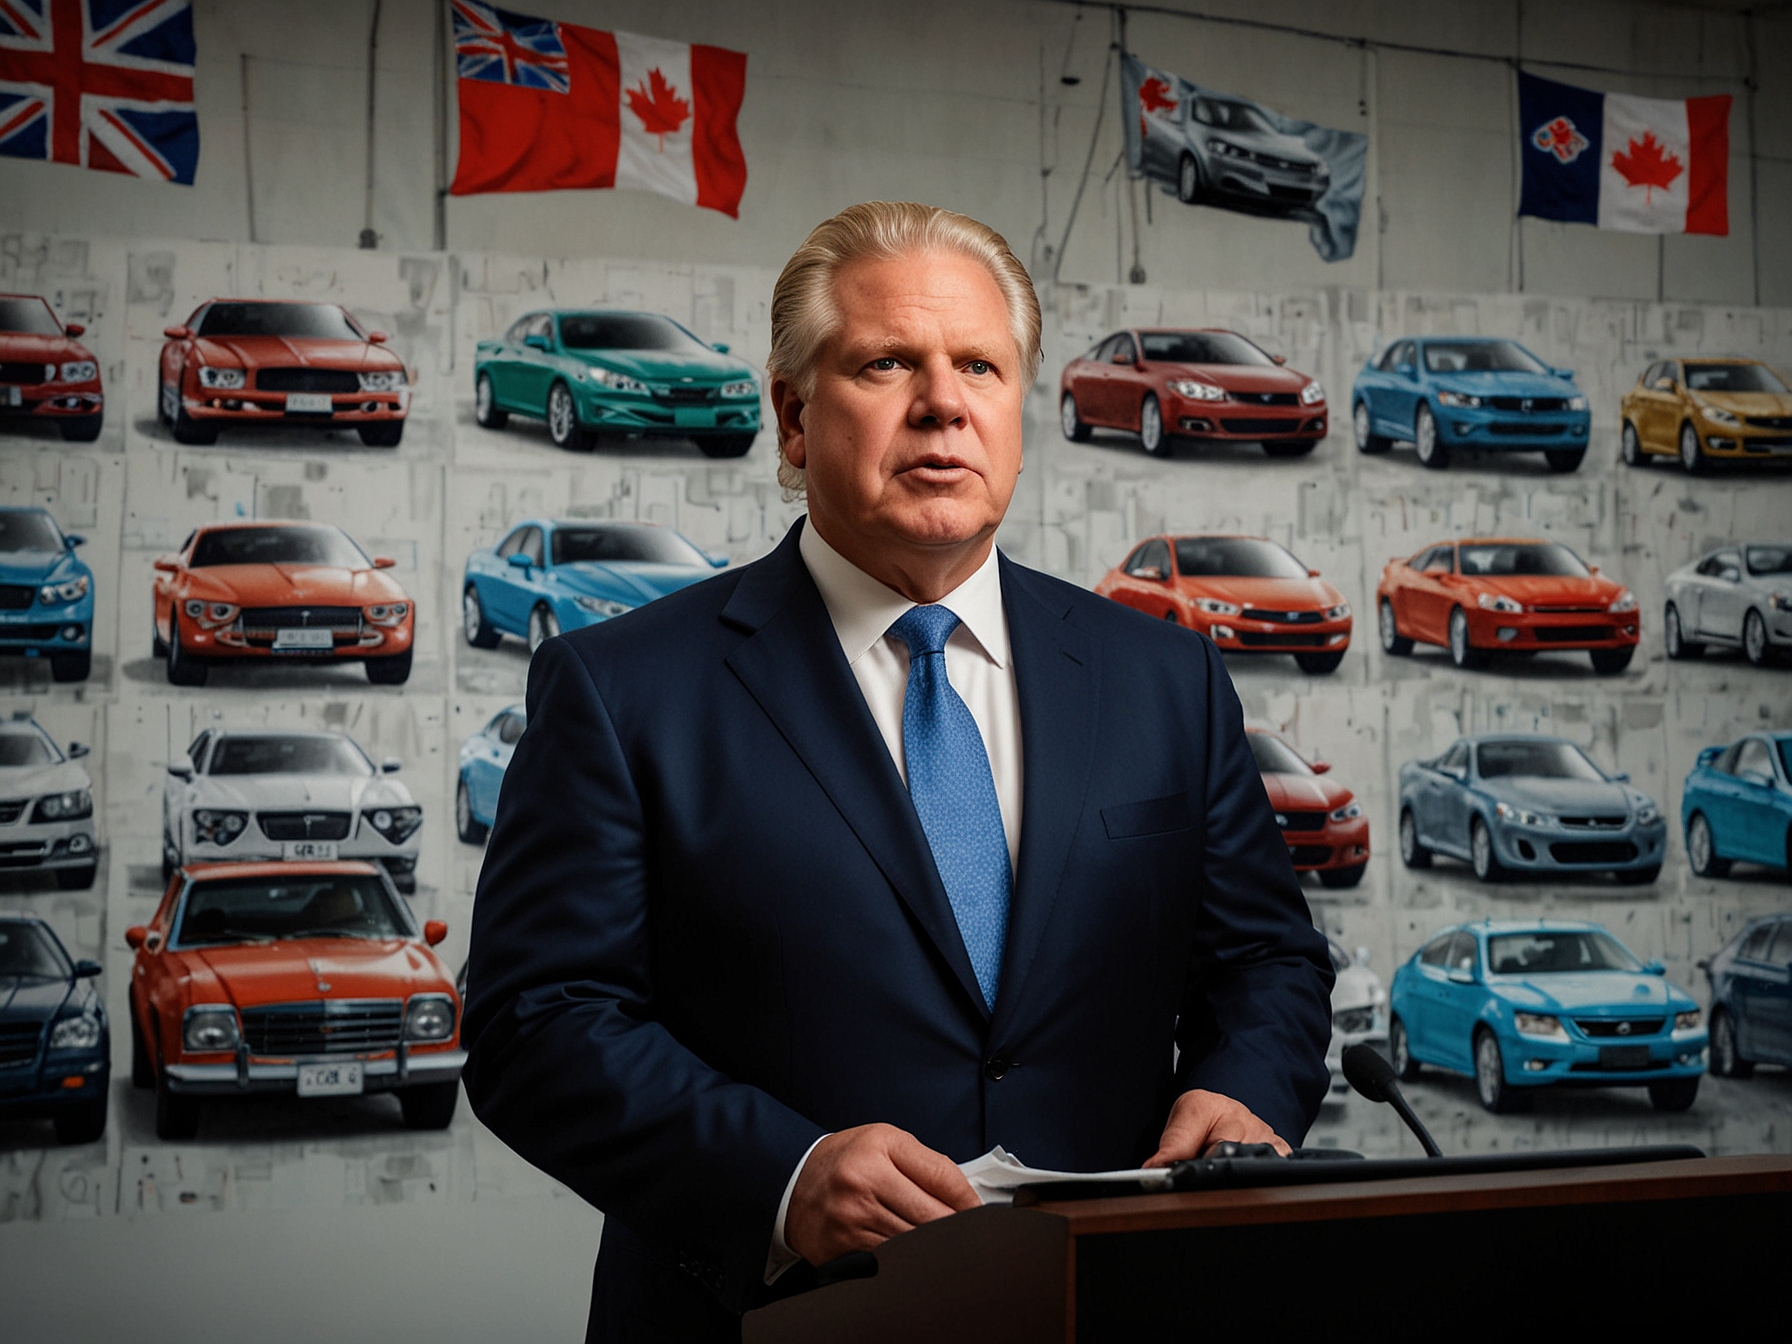 Doug Ford addresses the press, emphasizing the need for tariffs on Chinese EVs to protect Ontario's auto industry jobs. He stands in front of a backdrop featuring Ontario automotive icons.